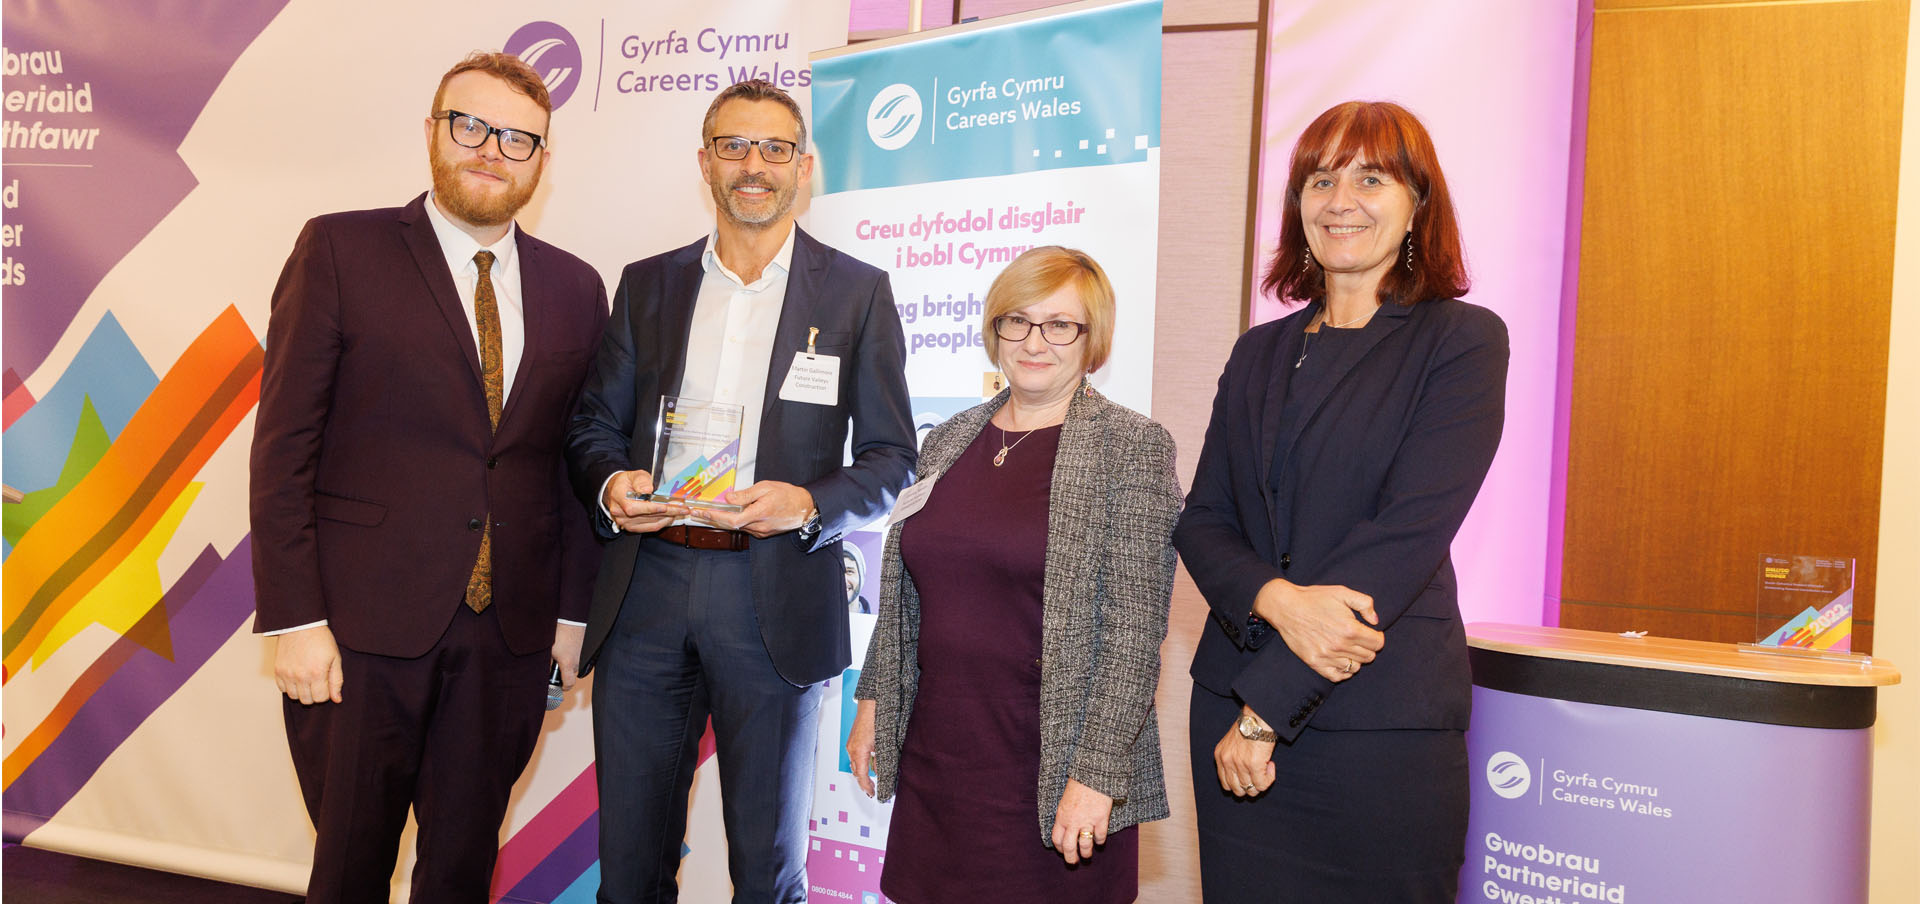 Martin Gallimore and Lesley Smith from Future Valleys Construction being presented with their award by presenter Huw Stephens and Nikki Lawrence, Chief Executive, Careers Wales